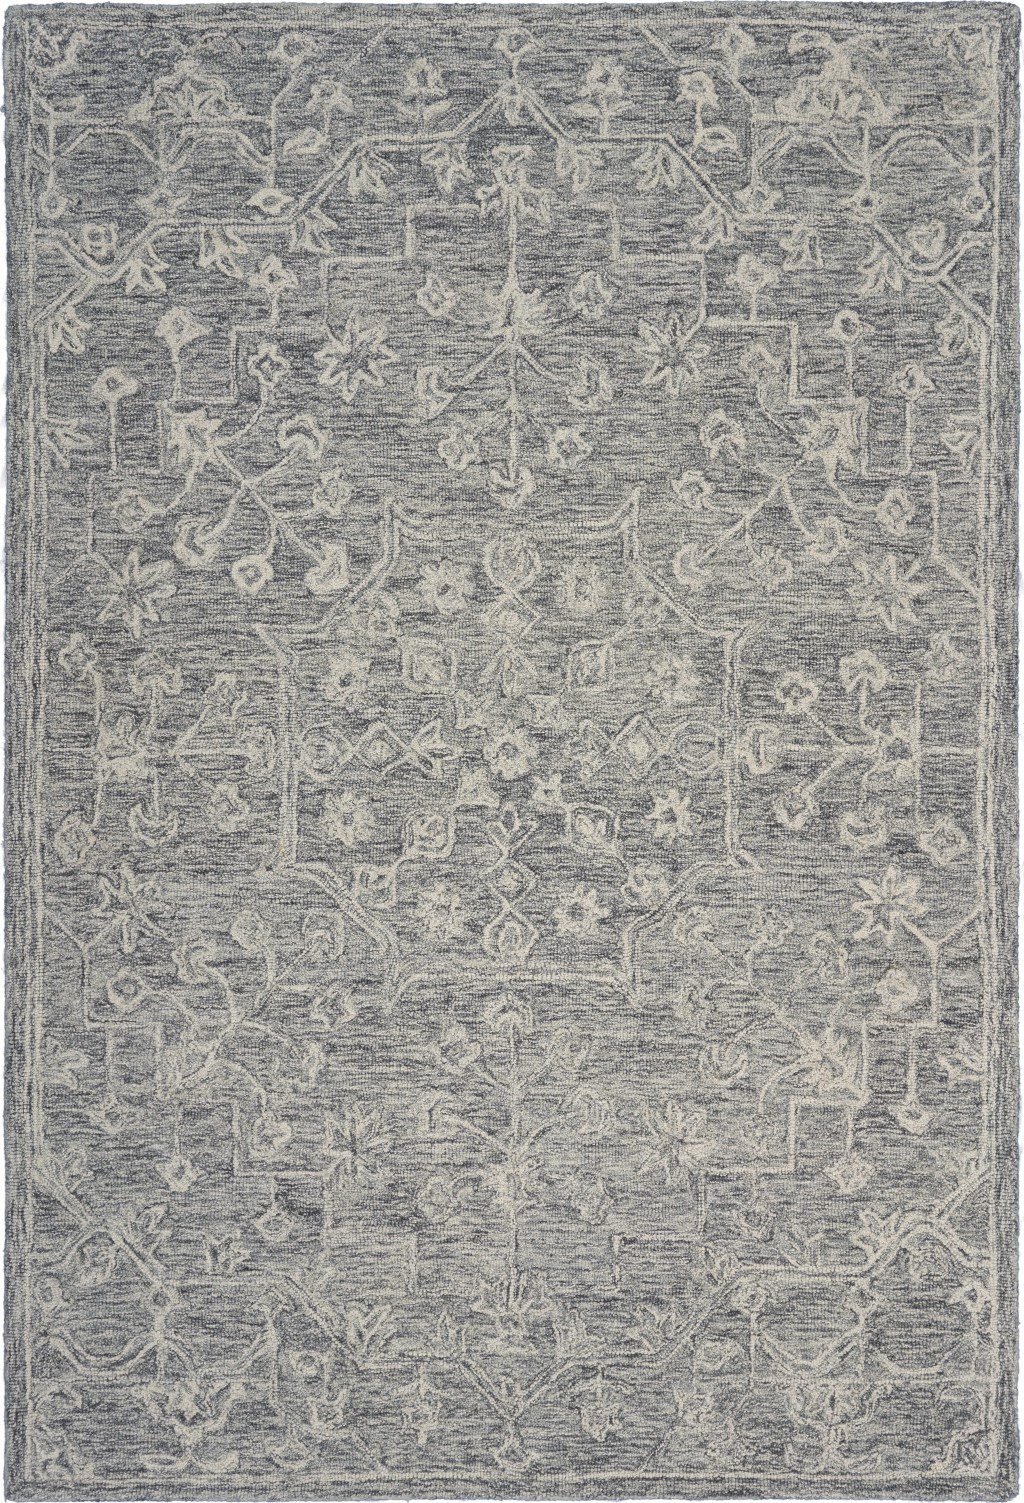 5’ x 7’ Gray Floral Finesse Area Rug-395787-1